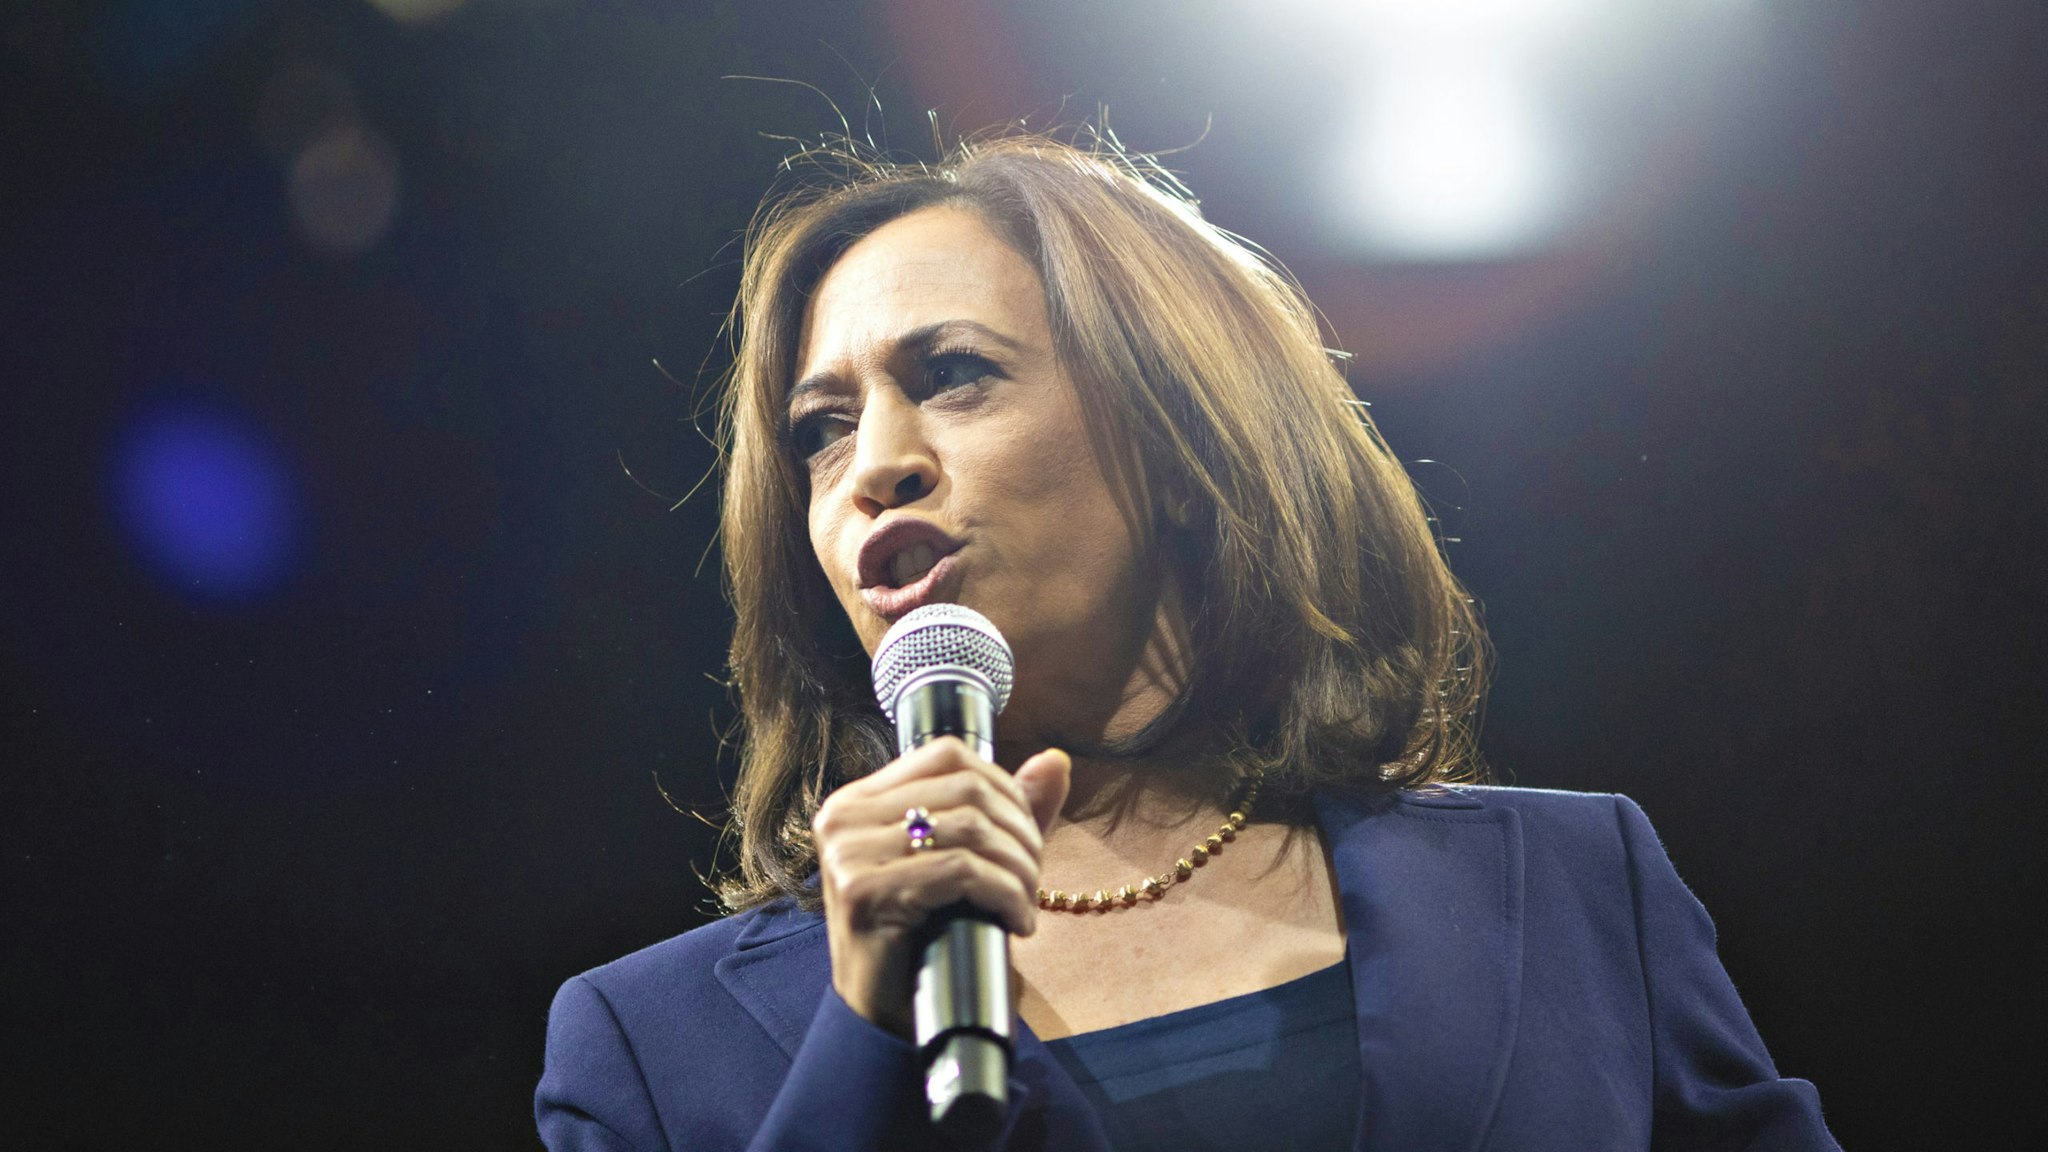 Senator Kamala Harris, a Democrat from California and 2020 presidential candidate, speaks during the Iowa Democratic Party Liberty &amp; Justice Dinner in Des Moines, Iowa, U.S., on Friday, Nov. 1, 2019. A New York Times/Siena College poll of Iowa Democrats released Friday showed the top four candidates Warren, Sanders, Buttigieg and Biden all bunched up in a five-point spread at the top of the field, within the poll's margin of error.